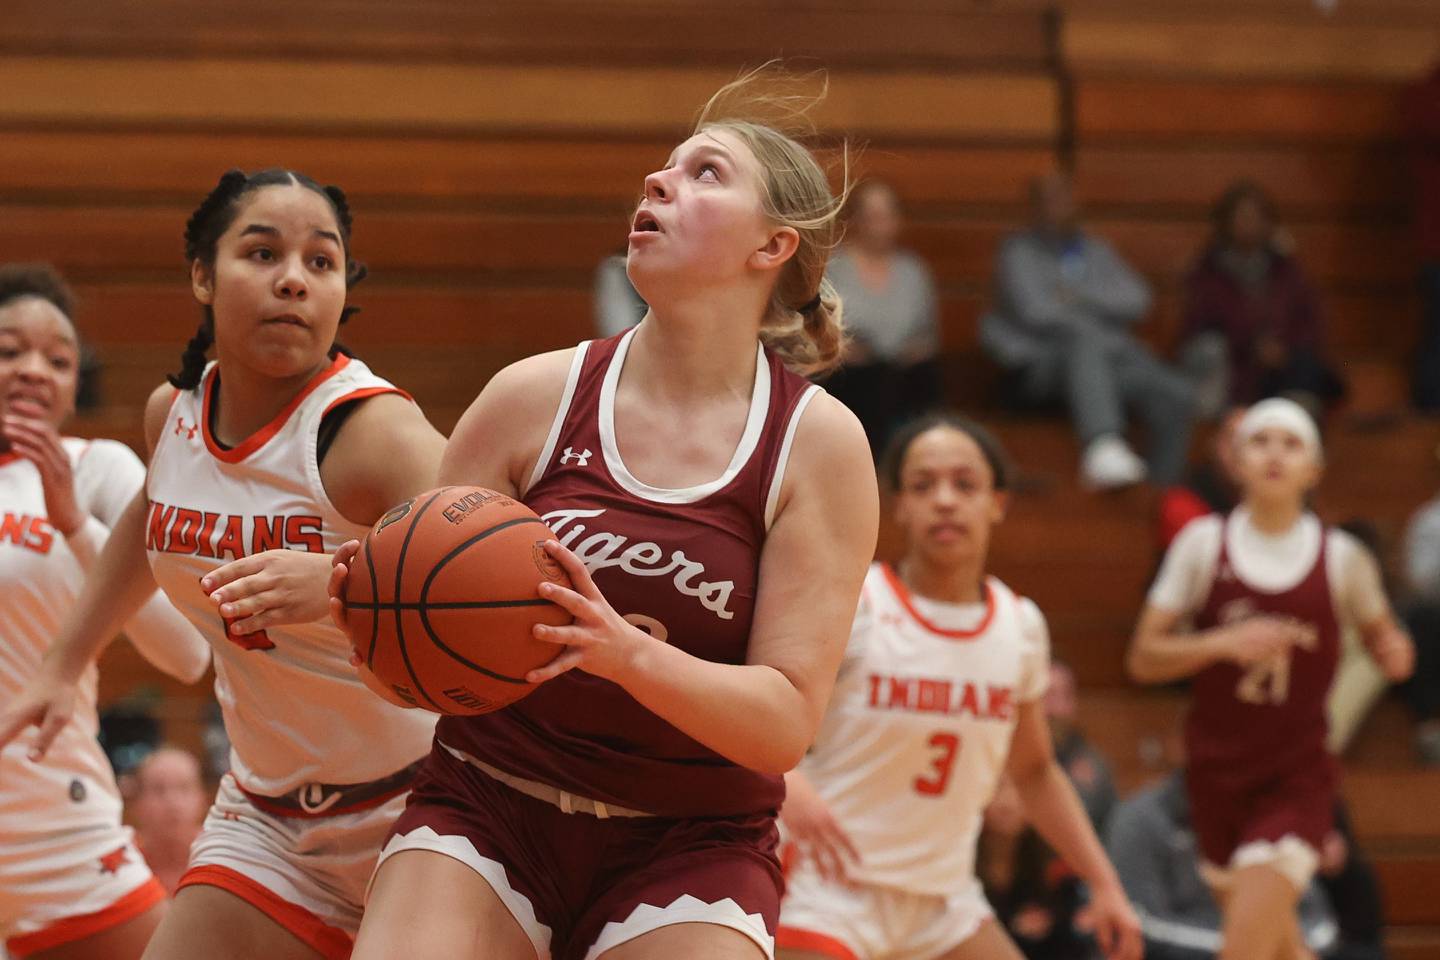 Plainfield North’s Isabella Gruber looks to shoot against Minooka.